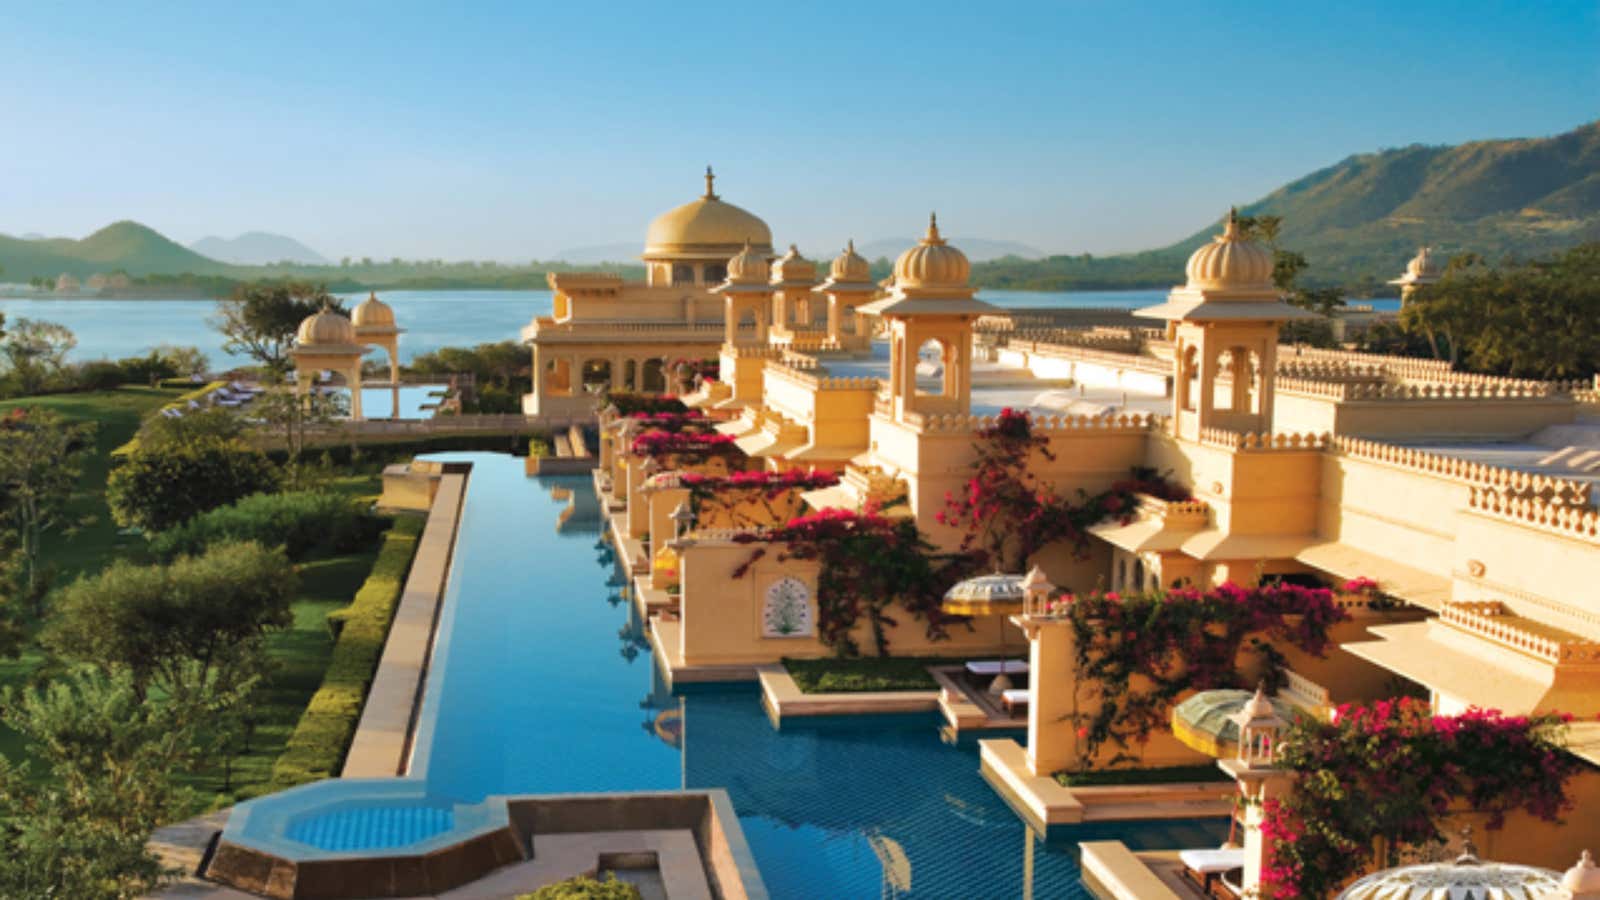 The Oberoi in Udaipur